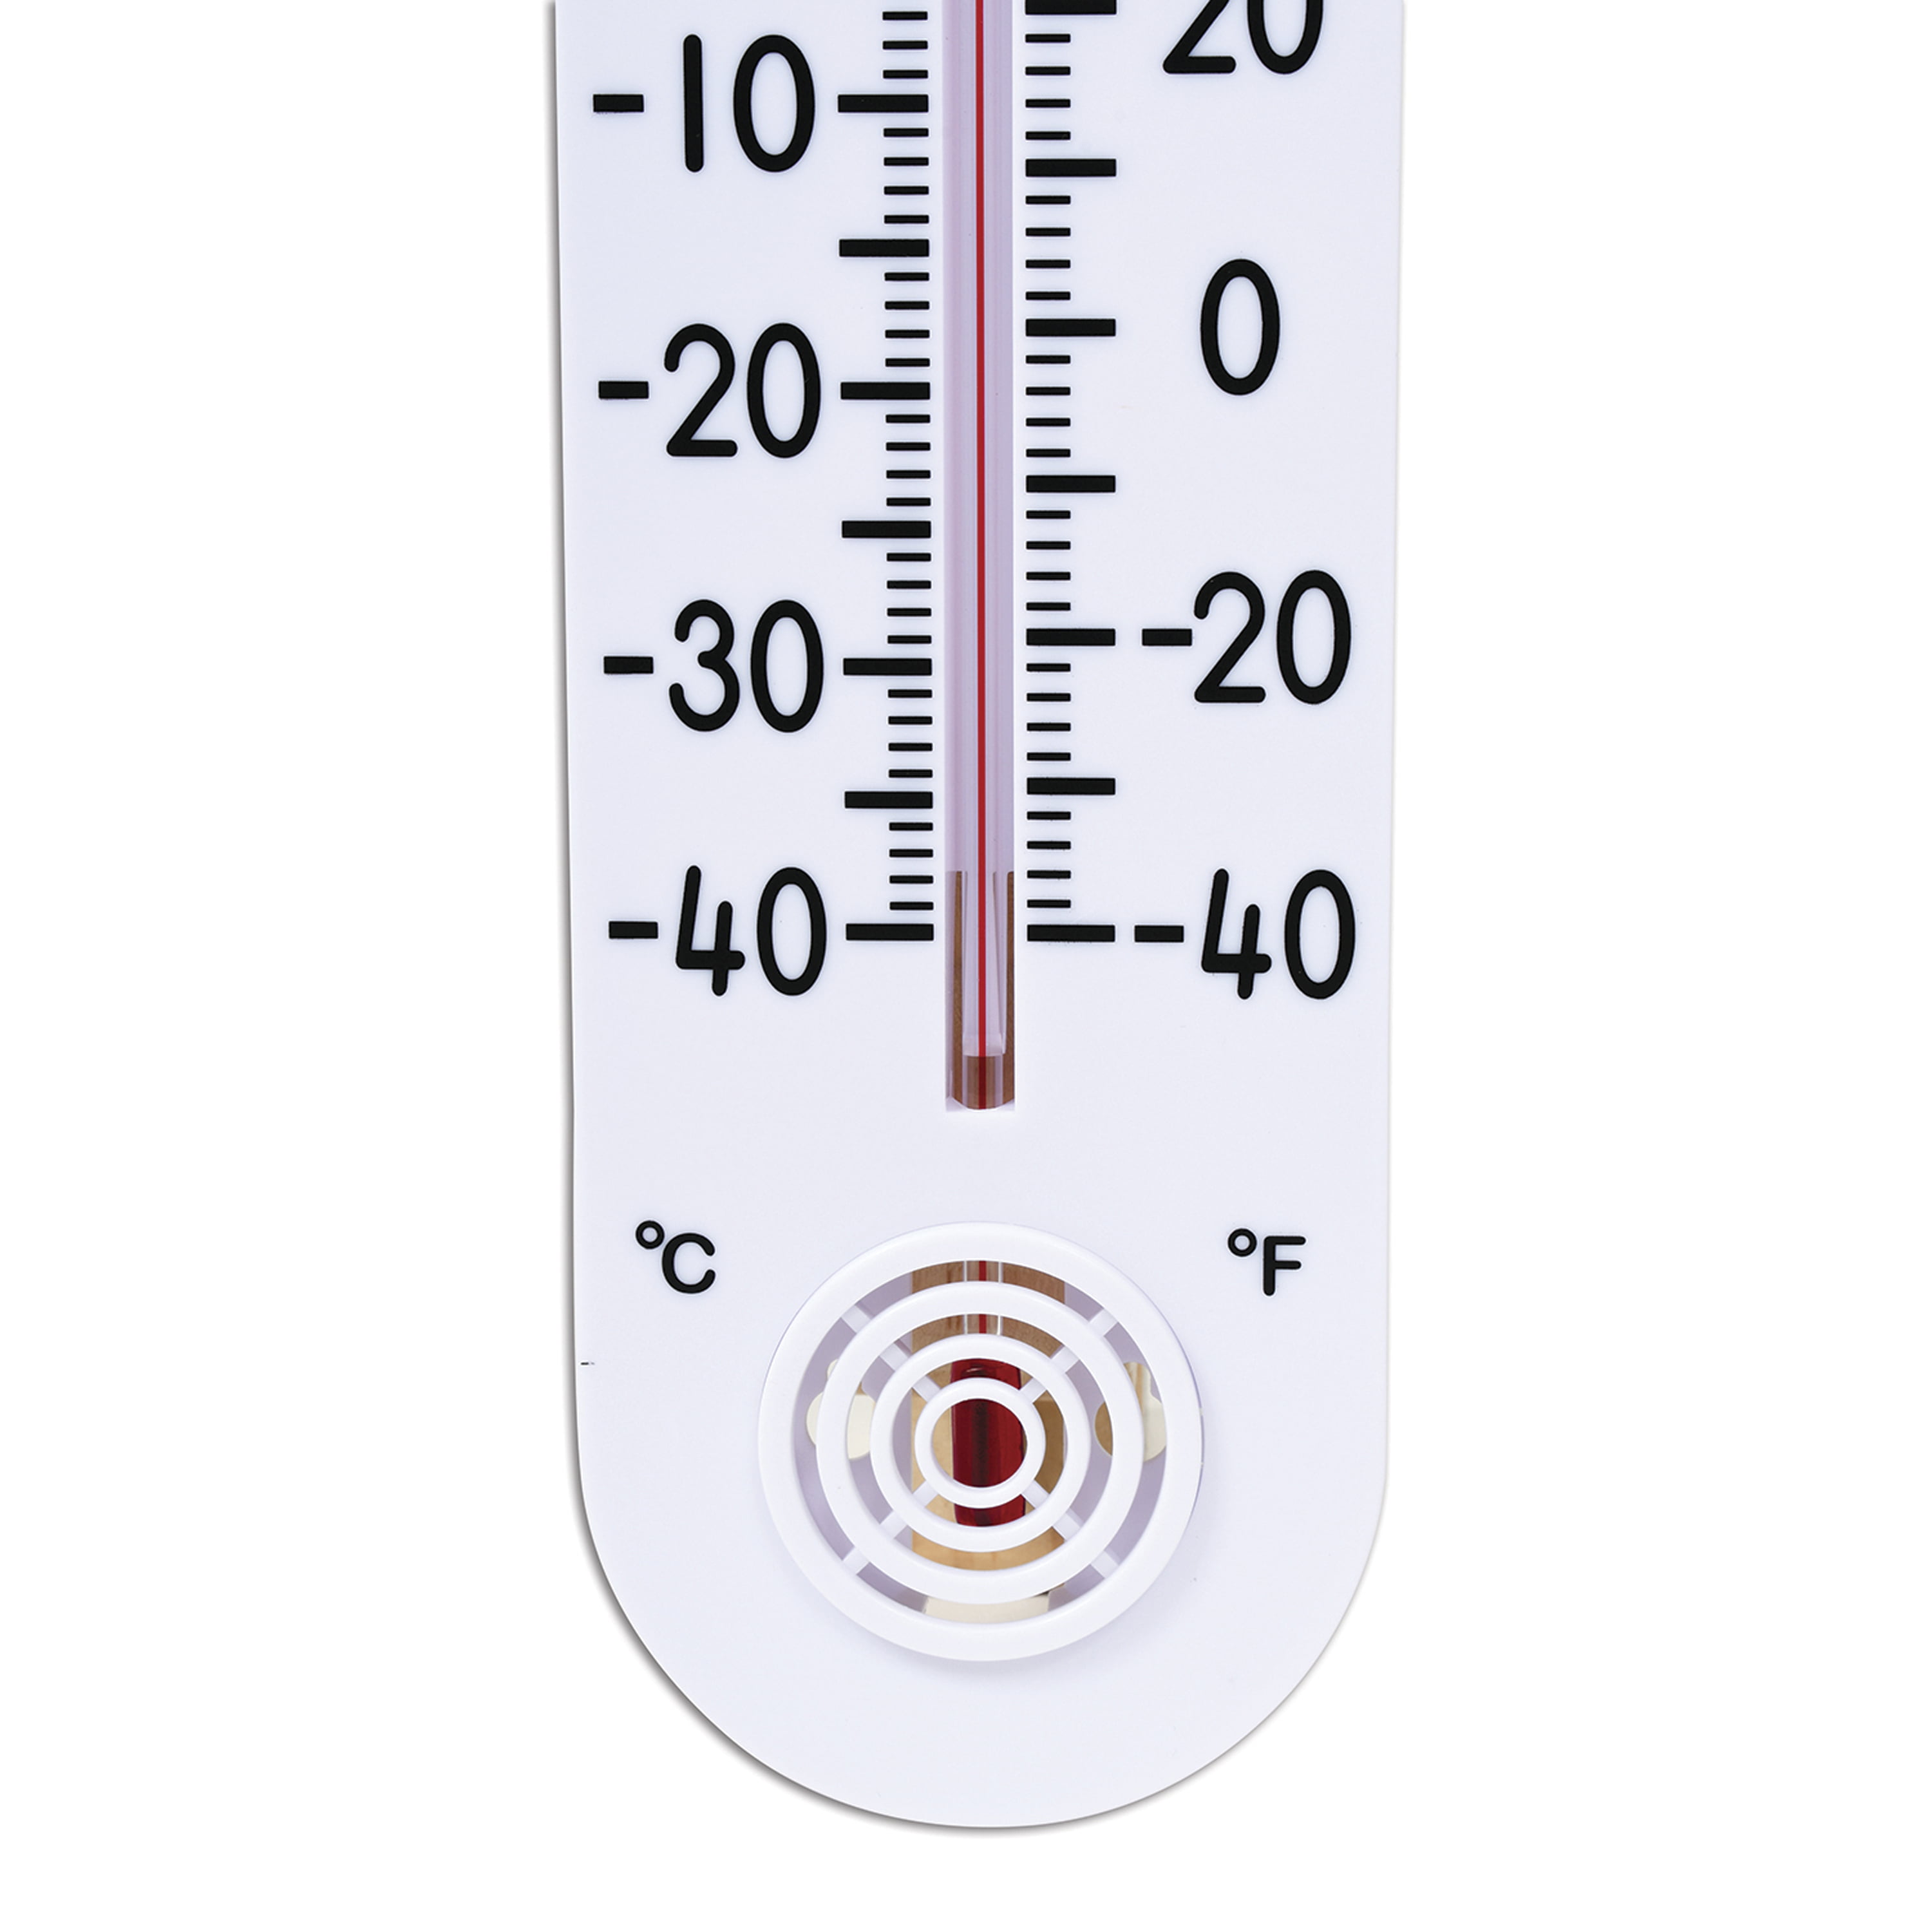 Indoor–outdoor thermometer - Wikipedia